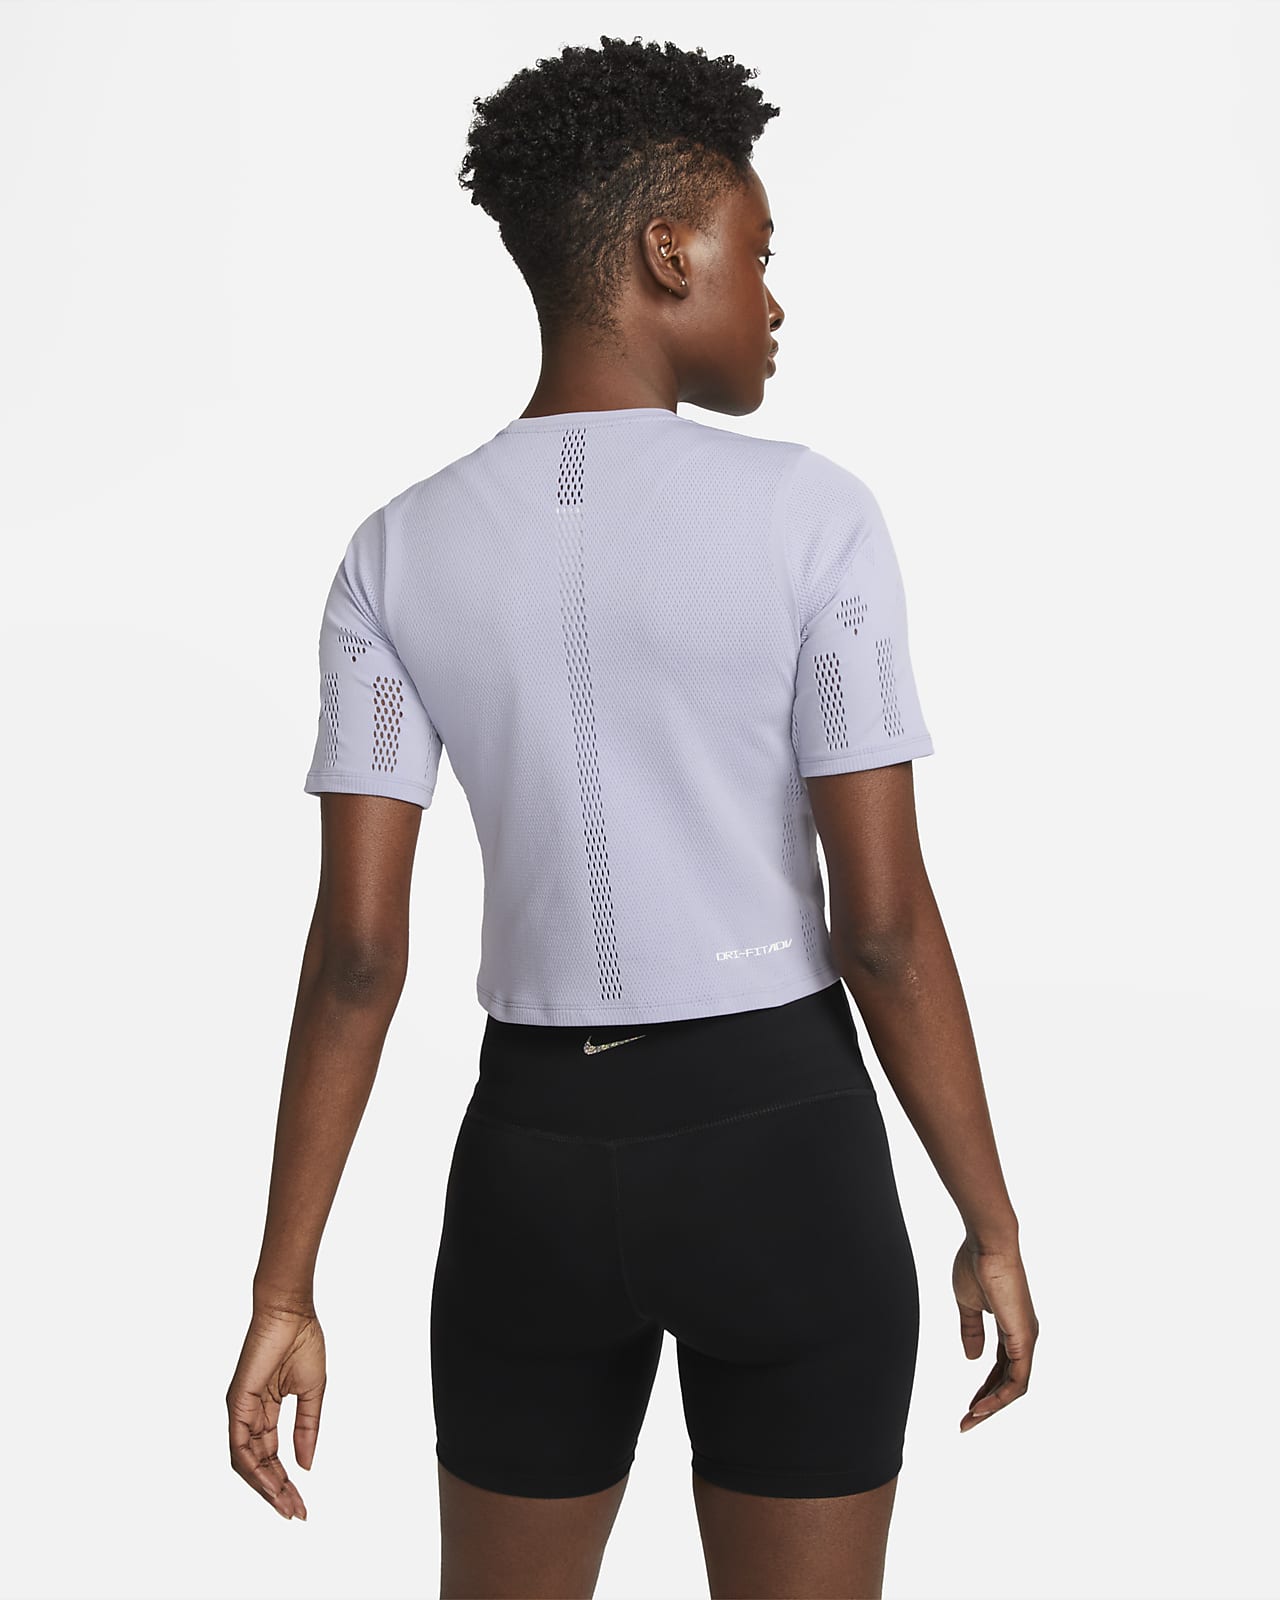 https://static.nike.com/a/images/t_PDP_1280_v1/f_auto,q_auto:eco/3b4ab33b-0a1a-44bd-ada4-1fe3d90ac09b/yoga-dri-fit-adv-luxe-short-sleeve-crop-top-WwVtcc.png